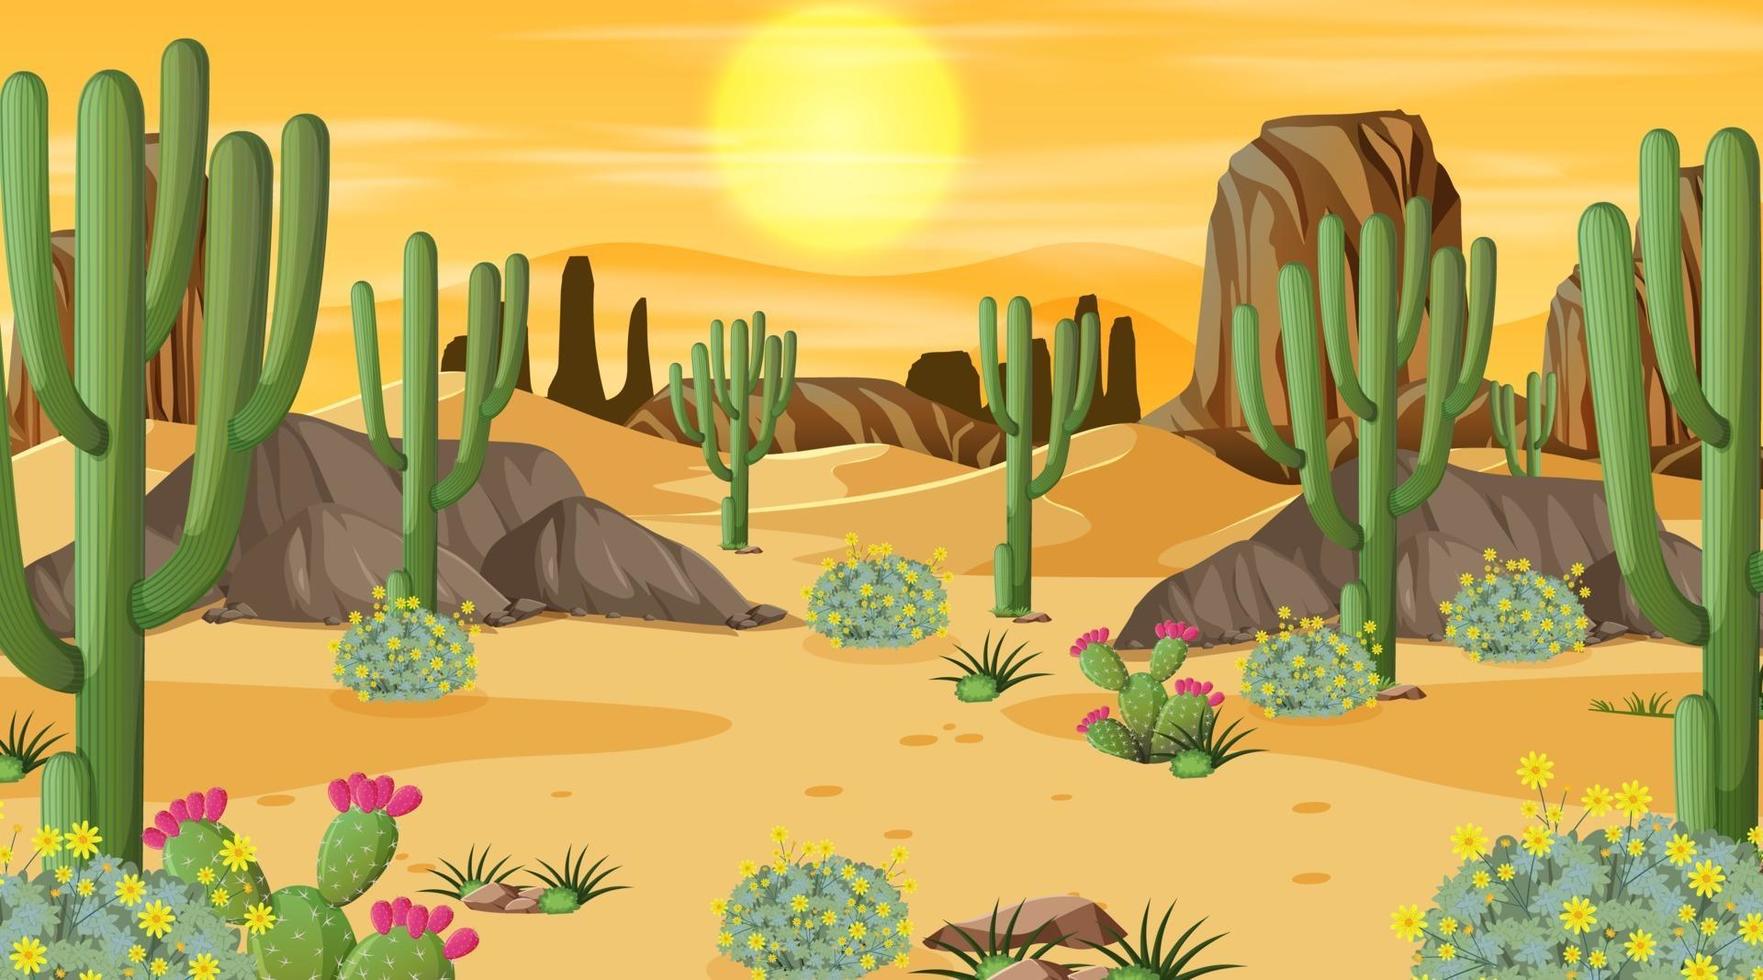 Desert forest landscape at sunset time scene with many cactuses vector